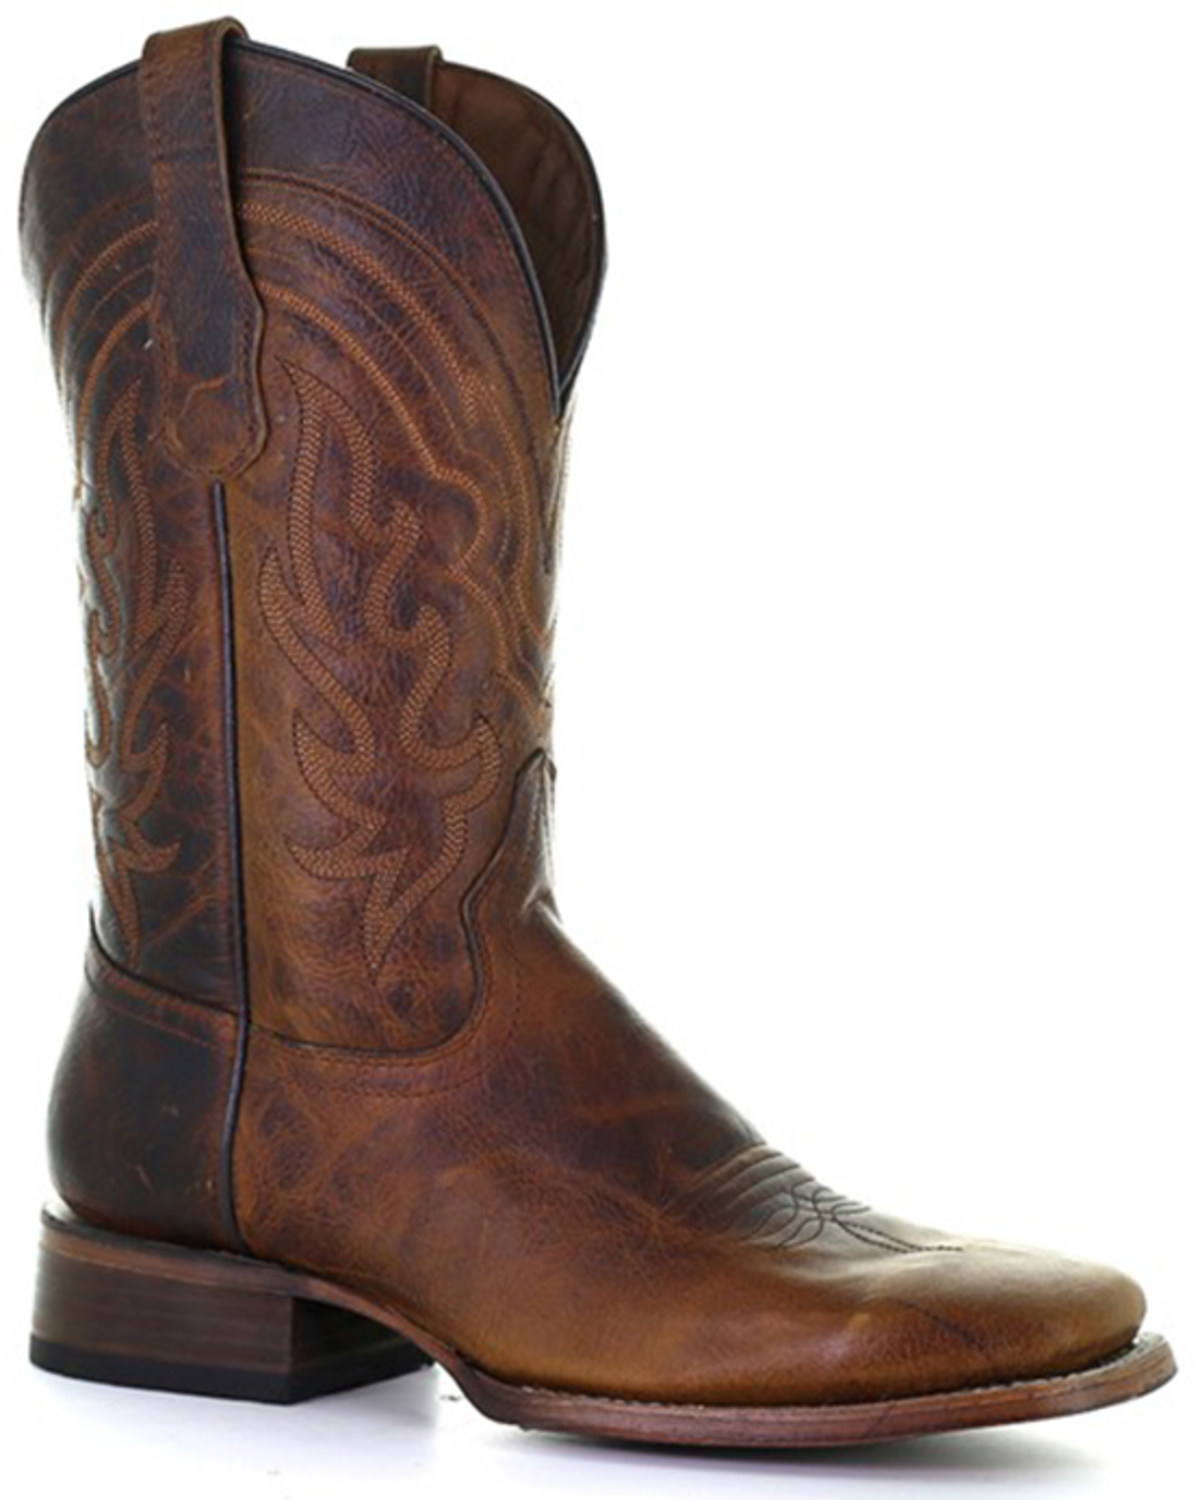 Corral Men's Embroidery Western Boots - Broad Square Toe